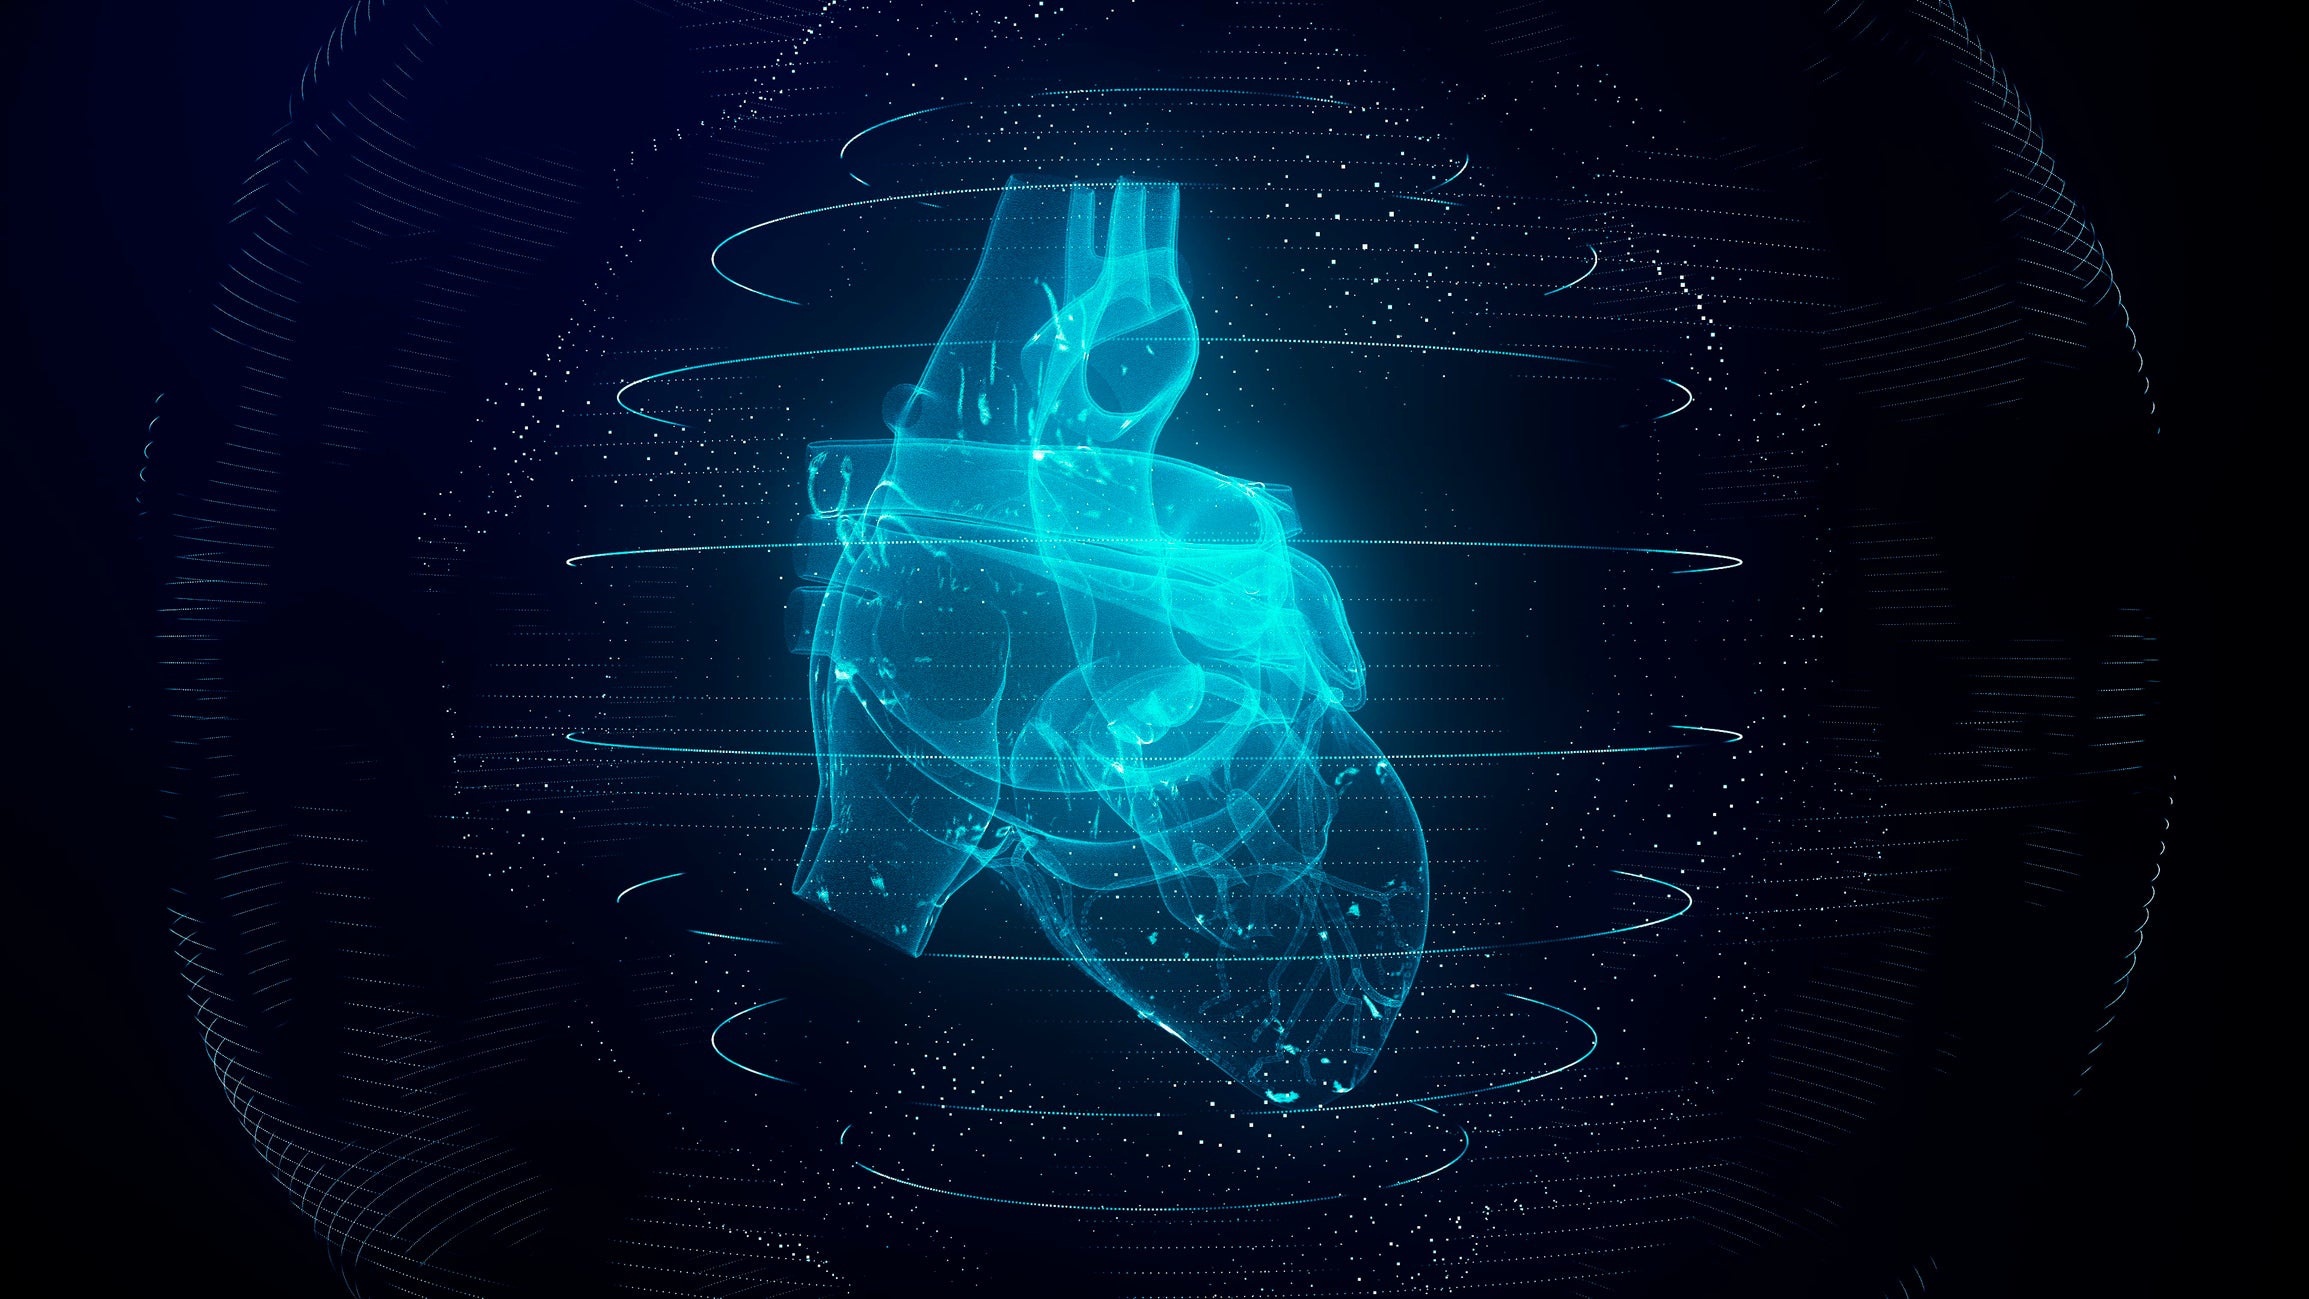 GE HealthCare launches new technology that cuts MRI heart scans by up to 83%